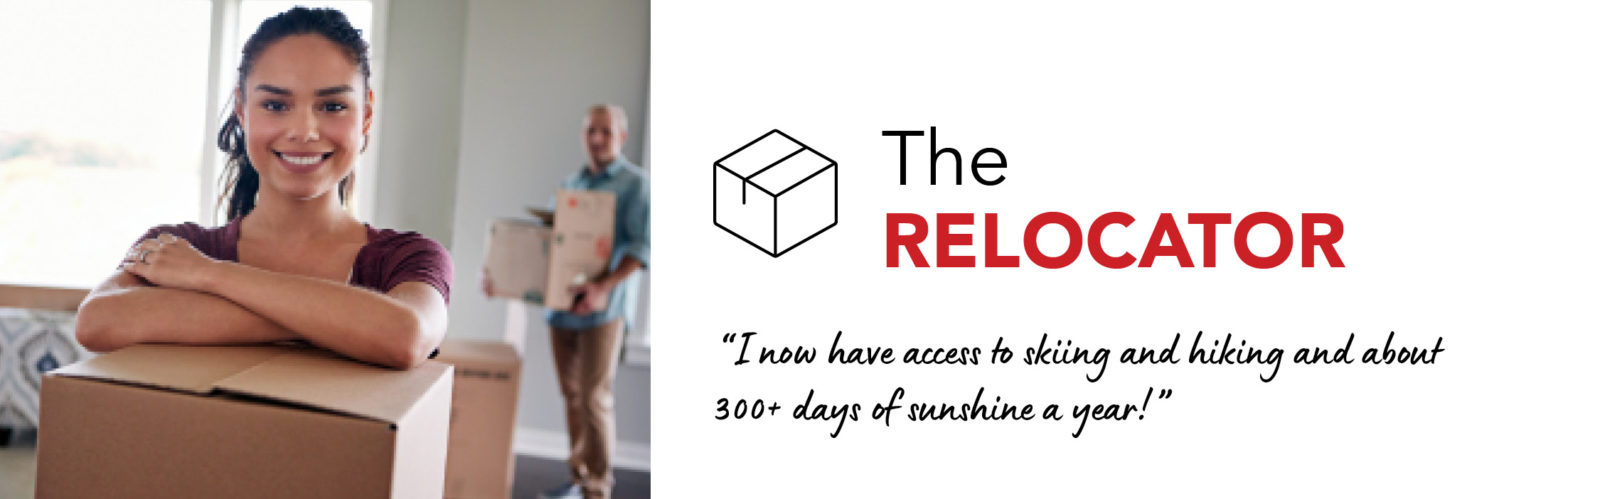 A woman holding a box labeled "the relocator" showcasing exceptional expertise in change management.